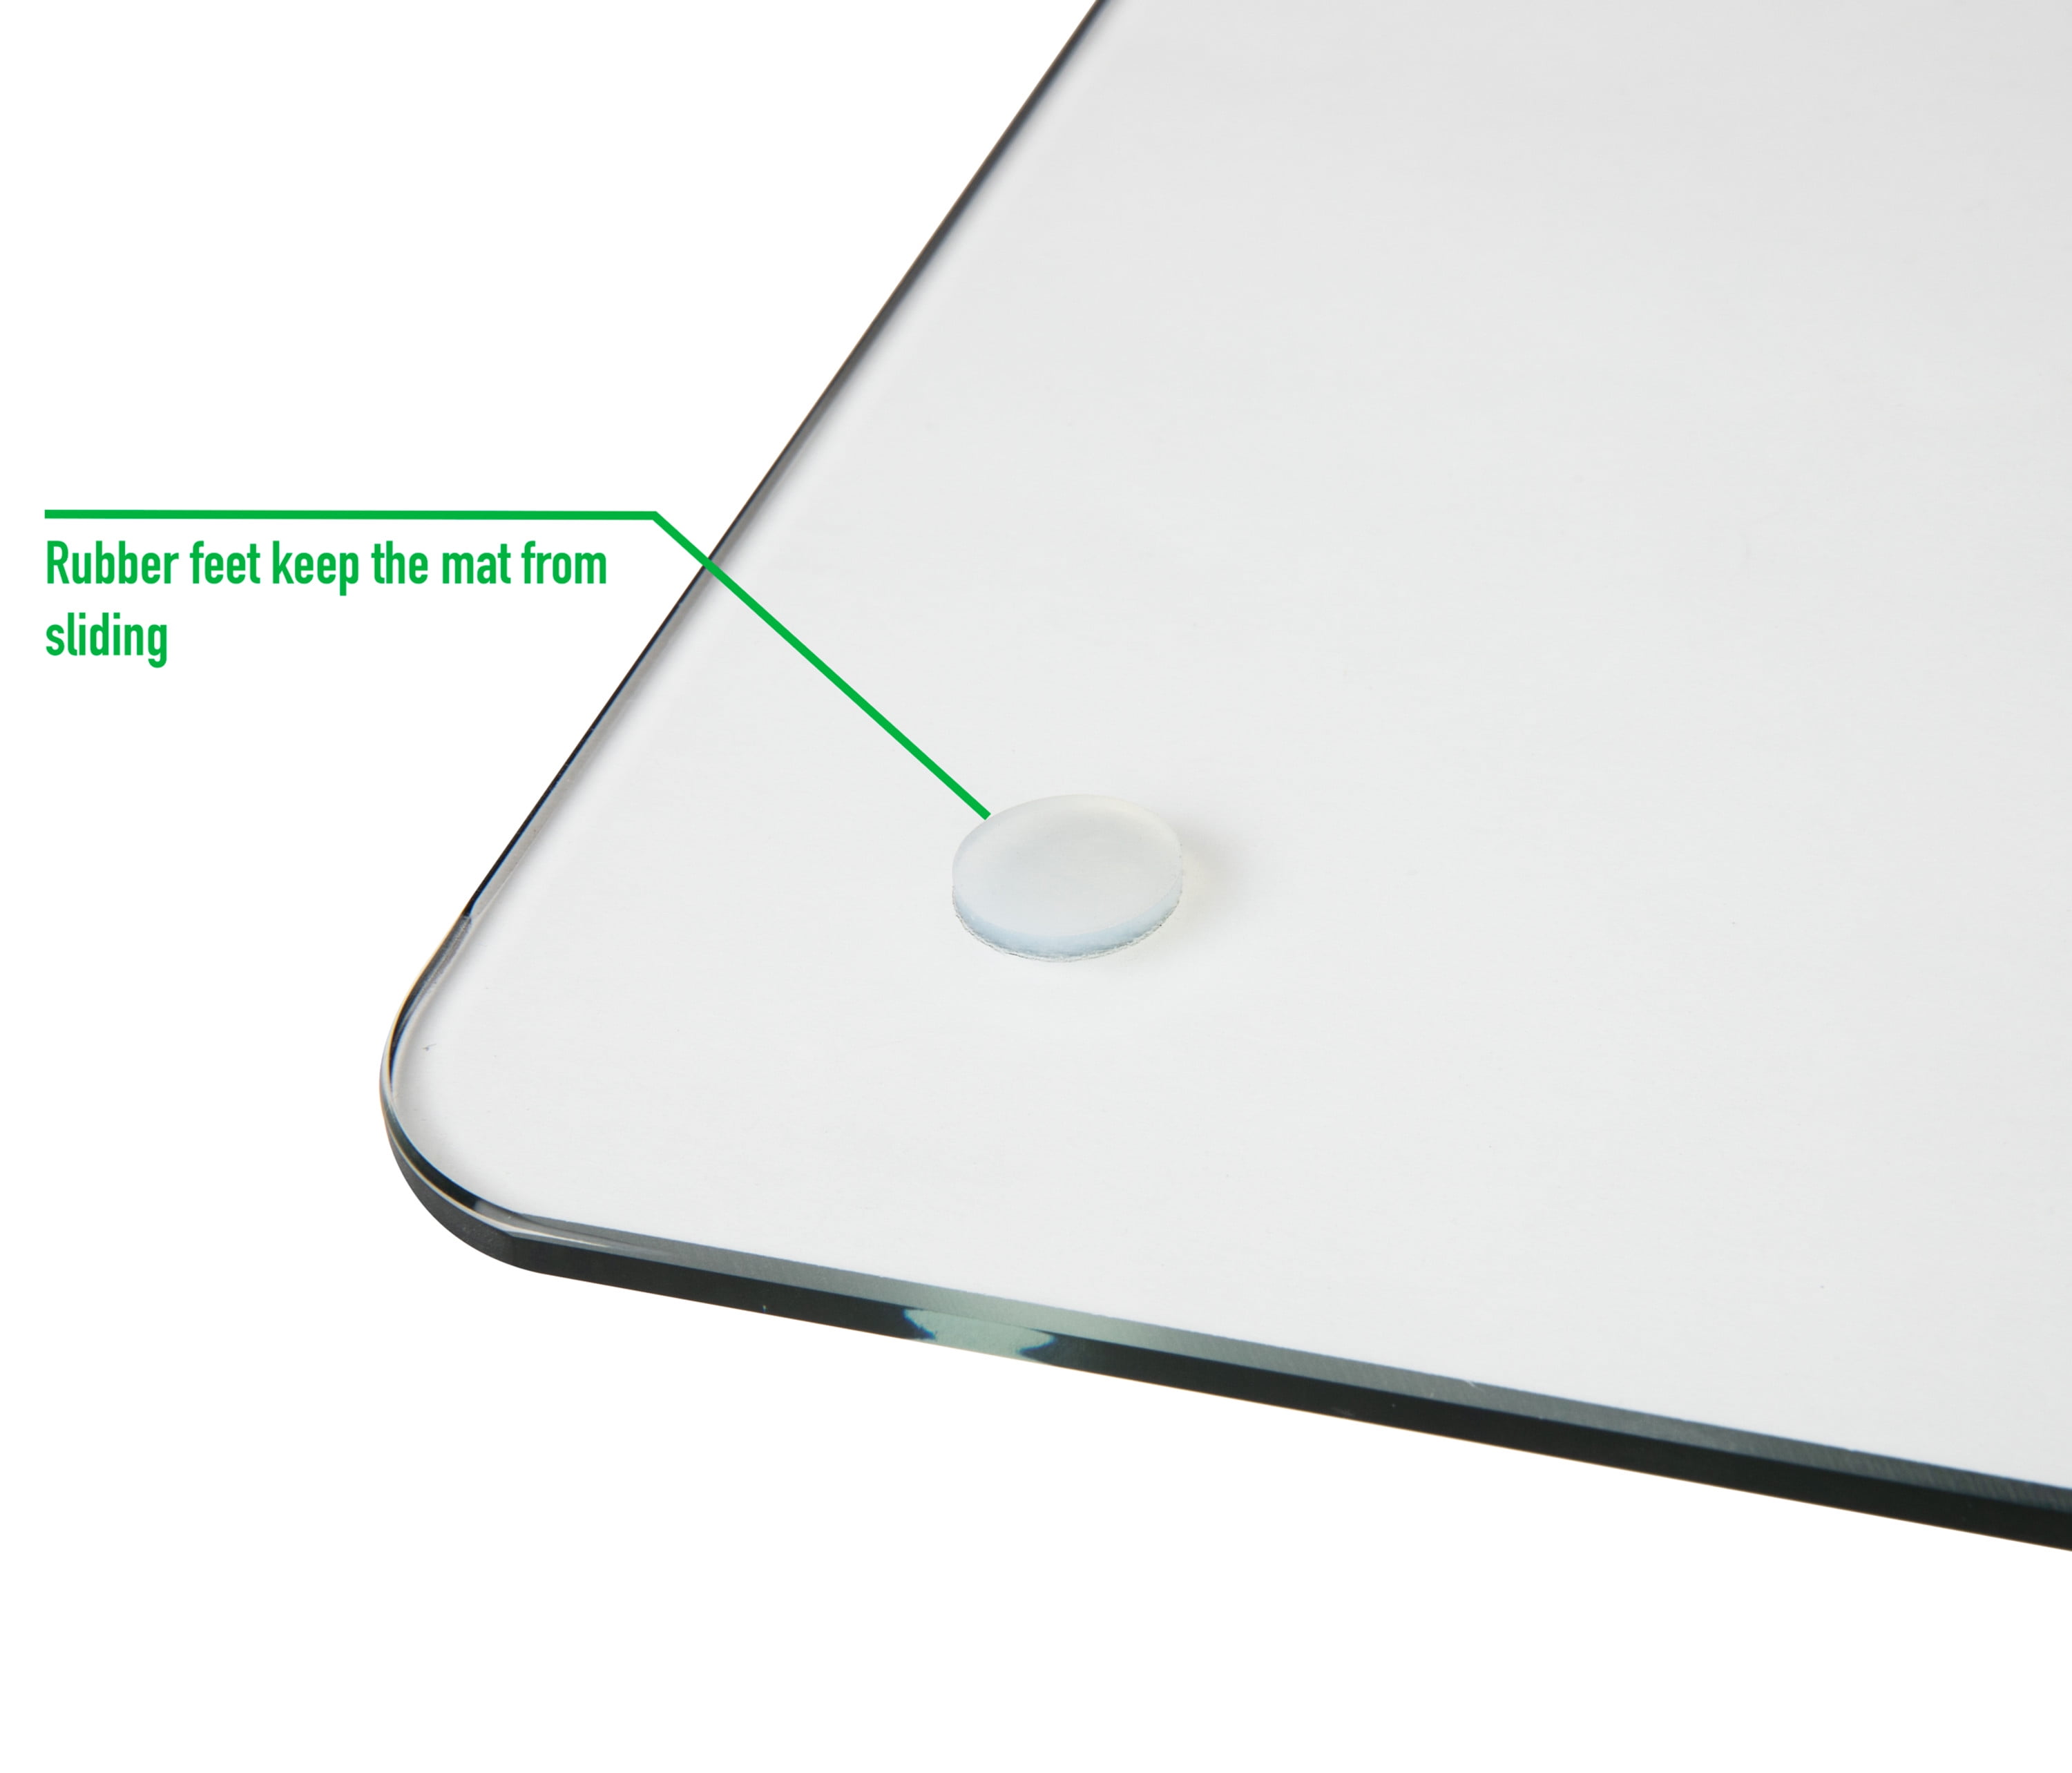 Glass Desk Pad  Clearly Innovative